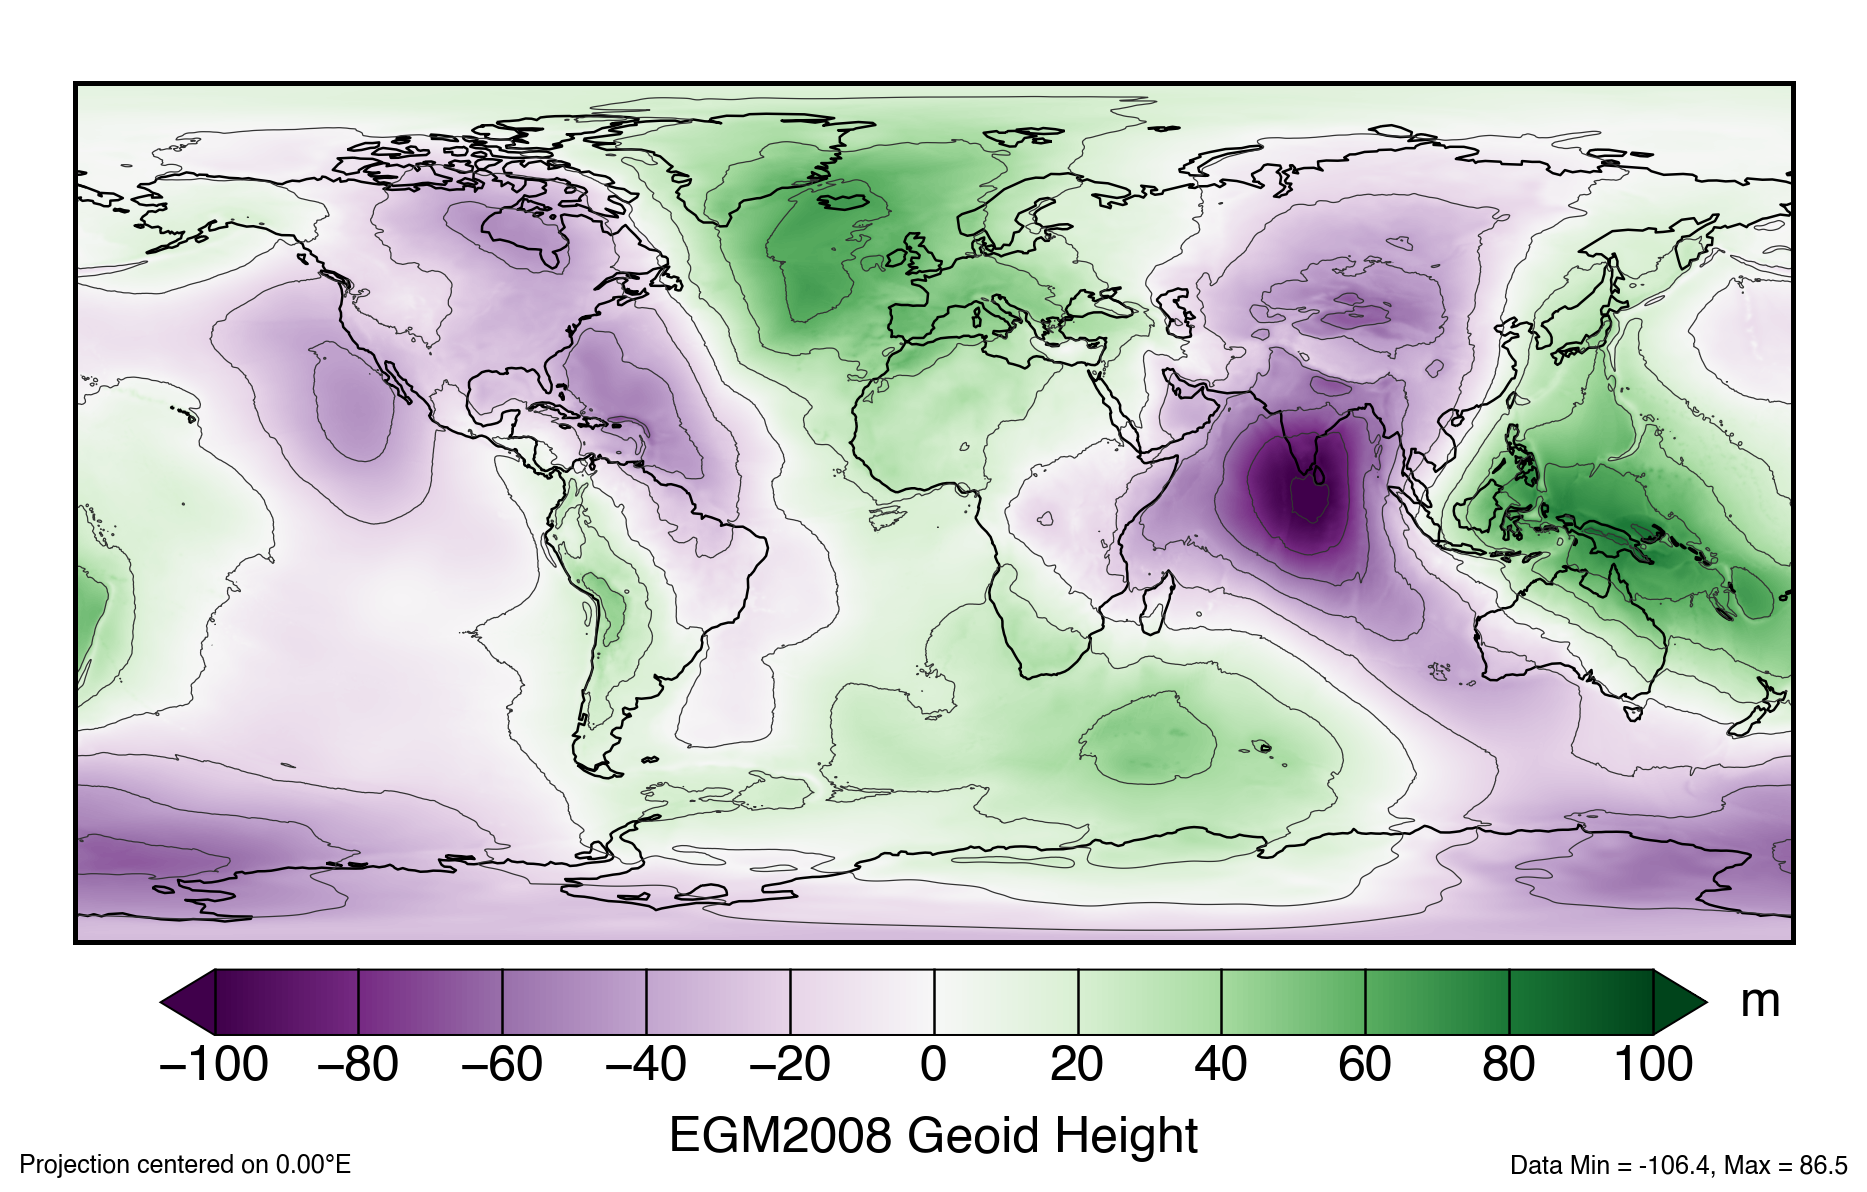 Derived from the International Centre for Global Earth Models (ICGEM)